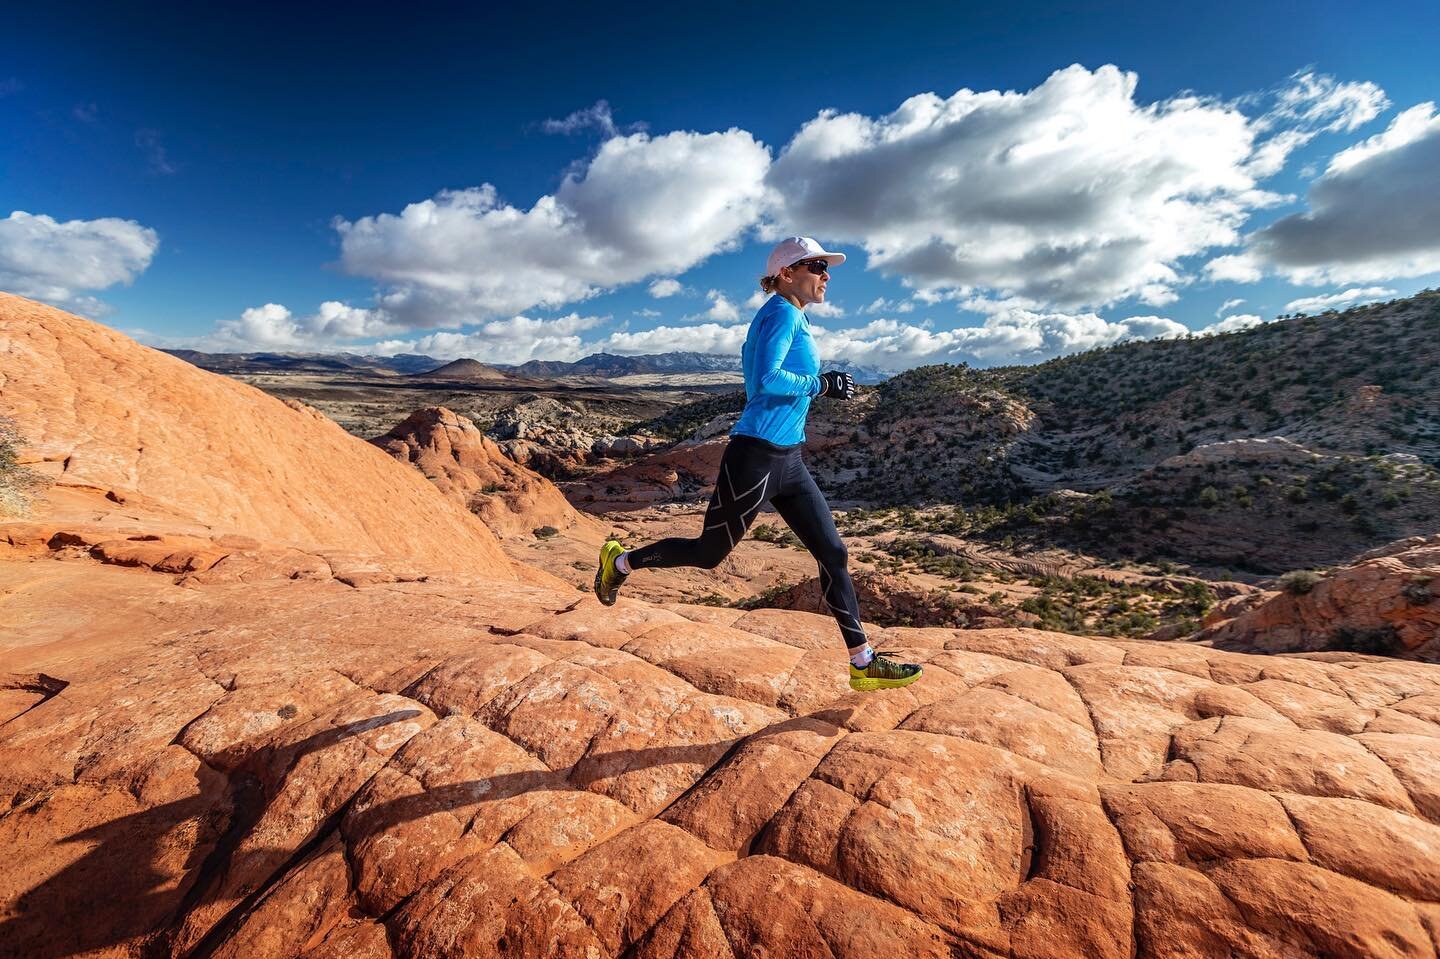 Two months of complete focus on my training in isolation in St George has been magical 💫 &bull; &ldquo;Think deeply and separate what you wish from what you are prepared to do&rdquo; ~ Percy Cerutty &bull; 📷 @daletravers @hokaoneone #timetofly 
.
.